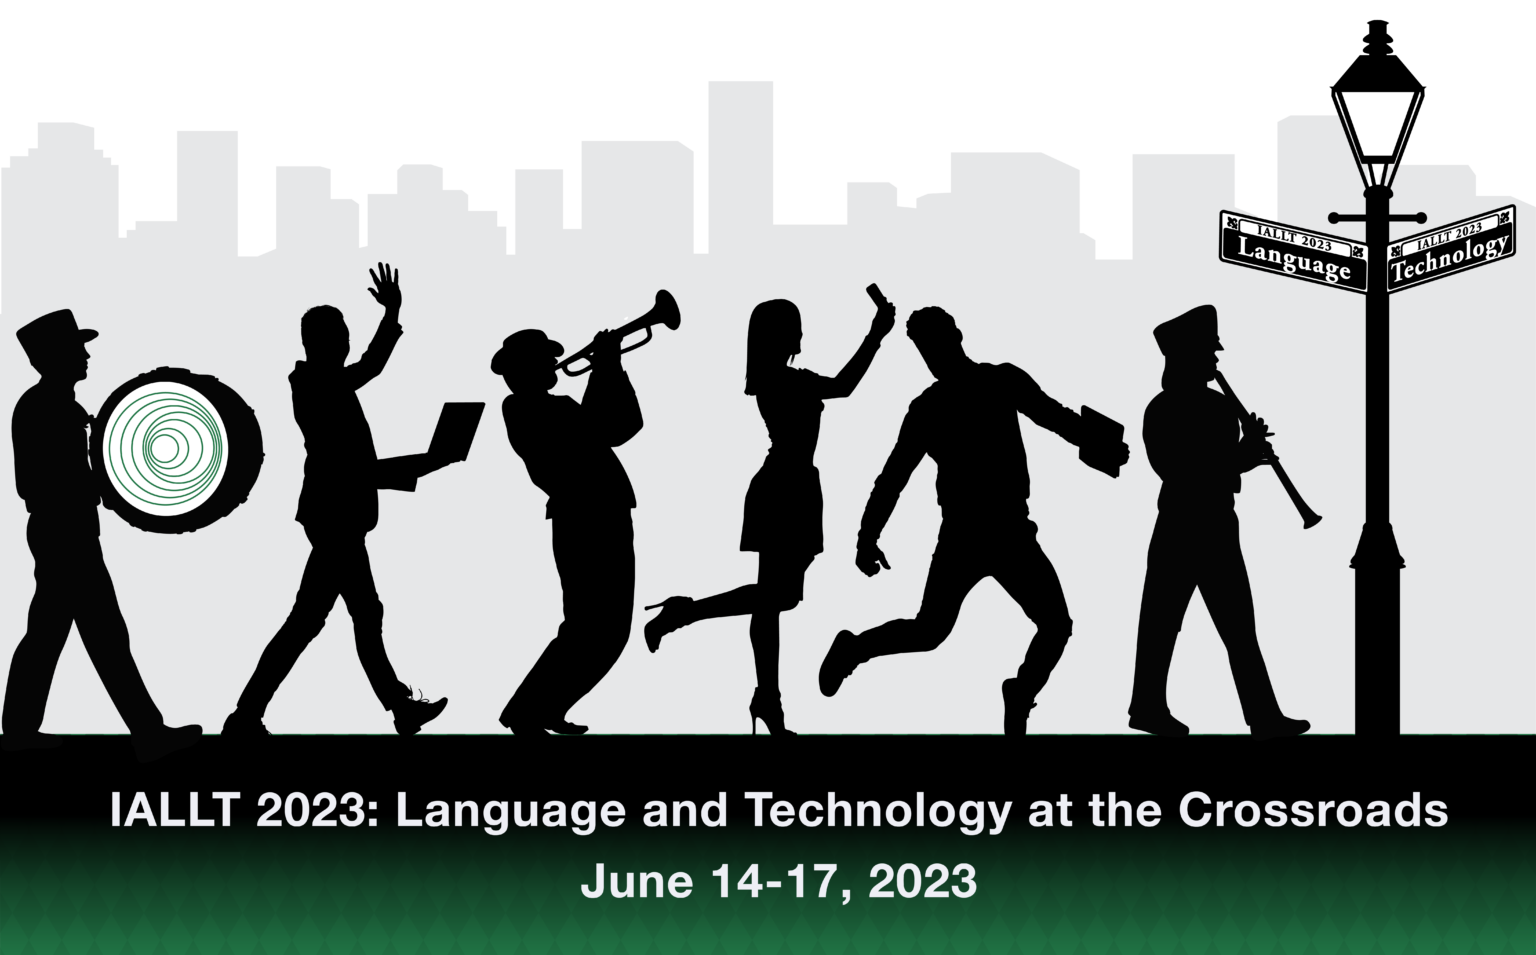 IALLT conference logo - Language and Technology at the Crossroads